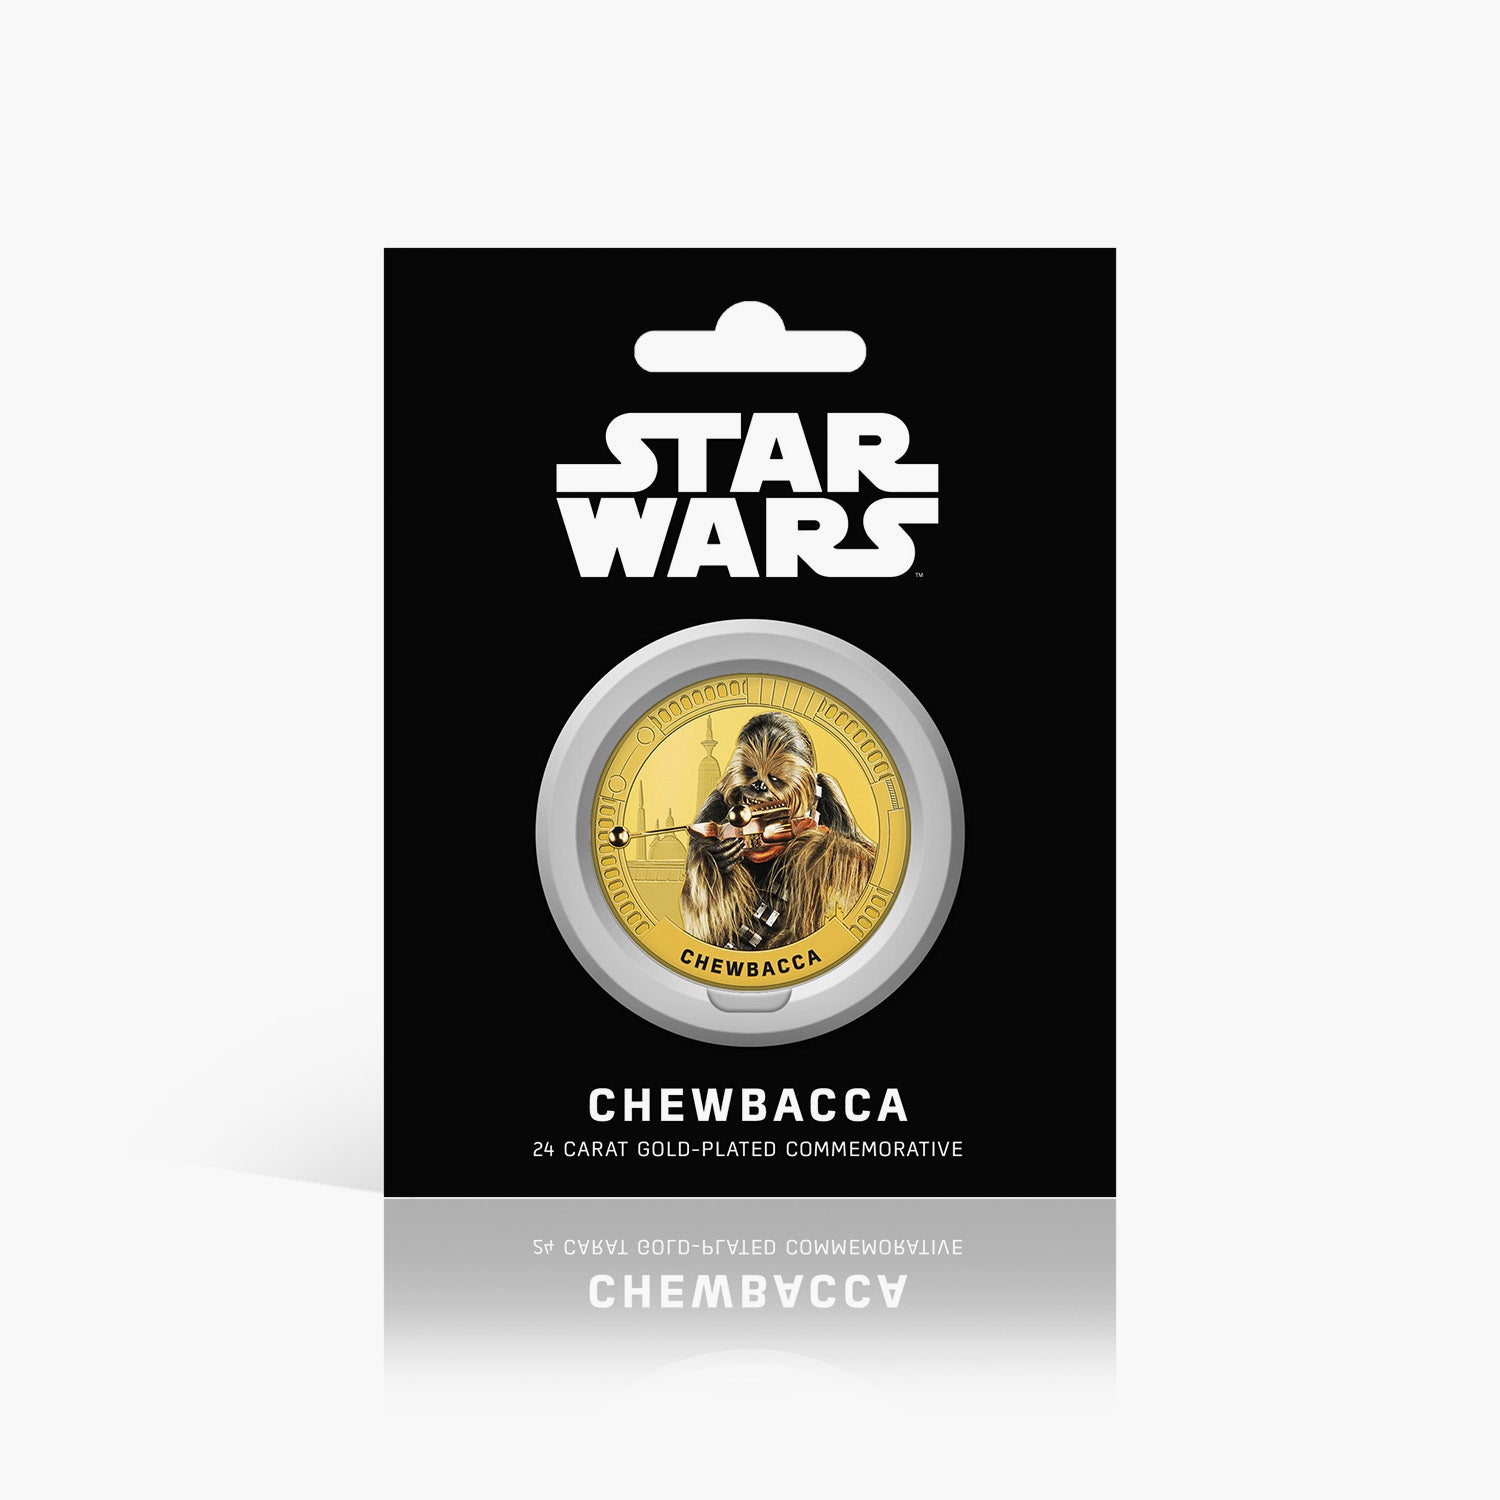 Chewbacca Gold - Plated Commemorative